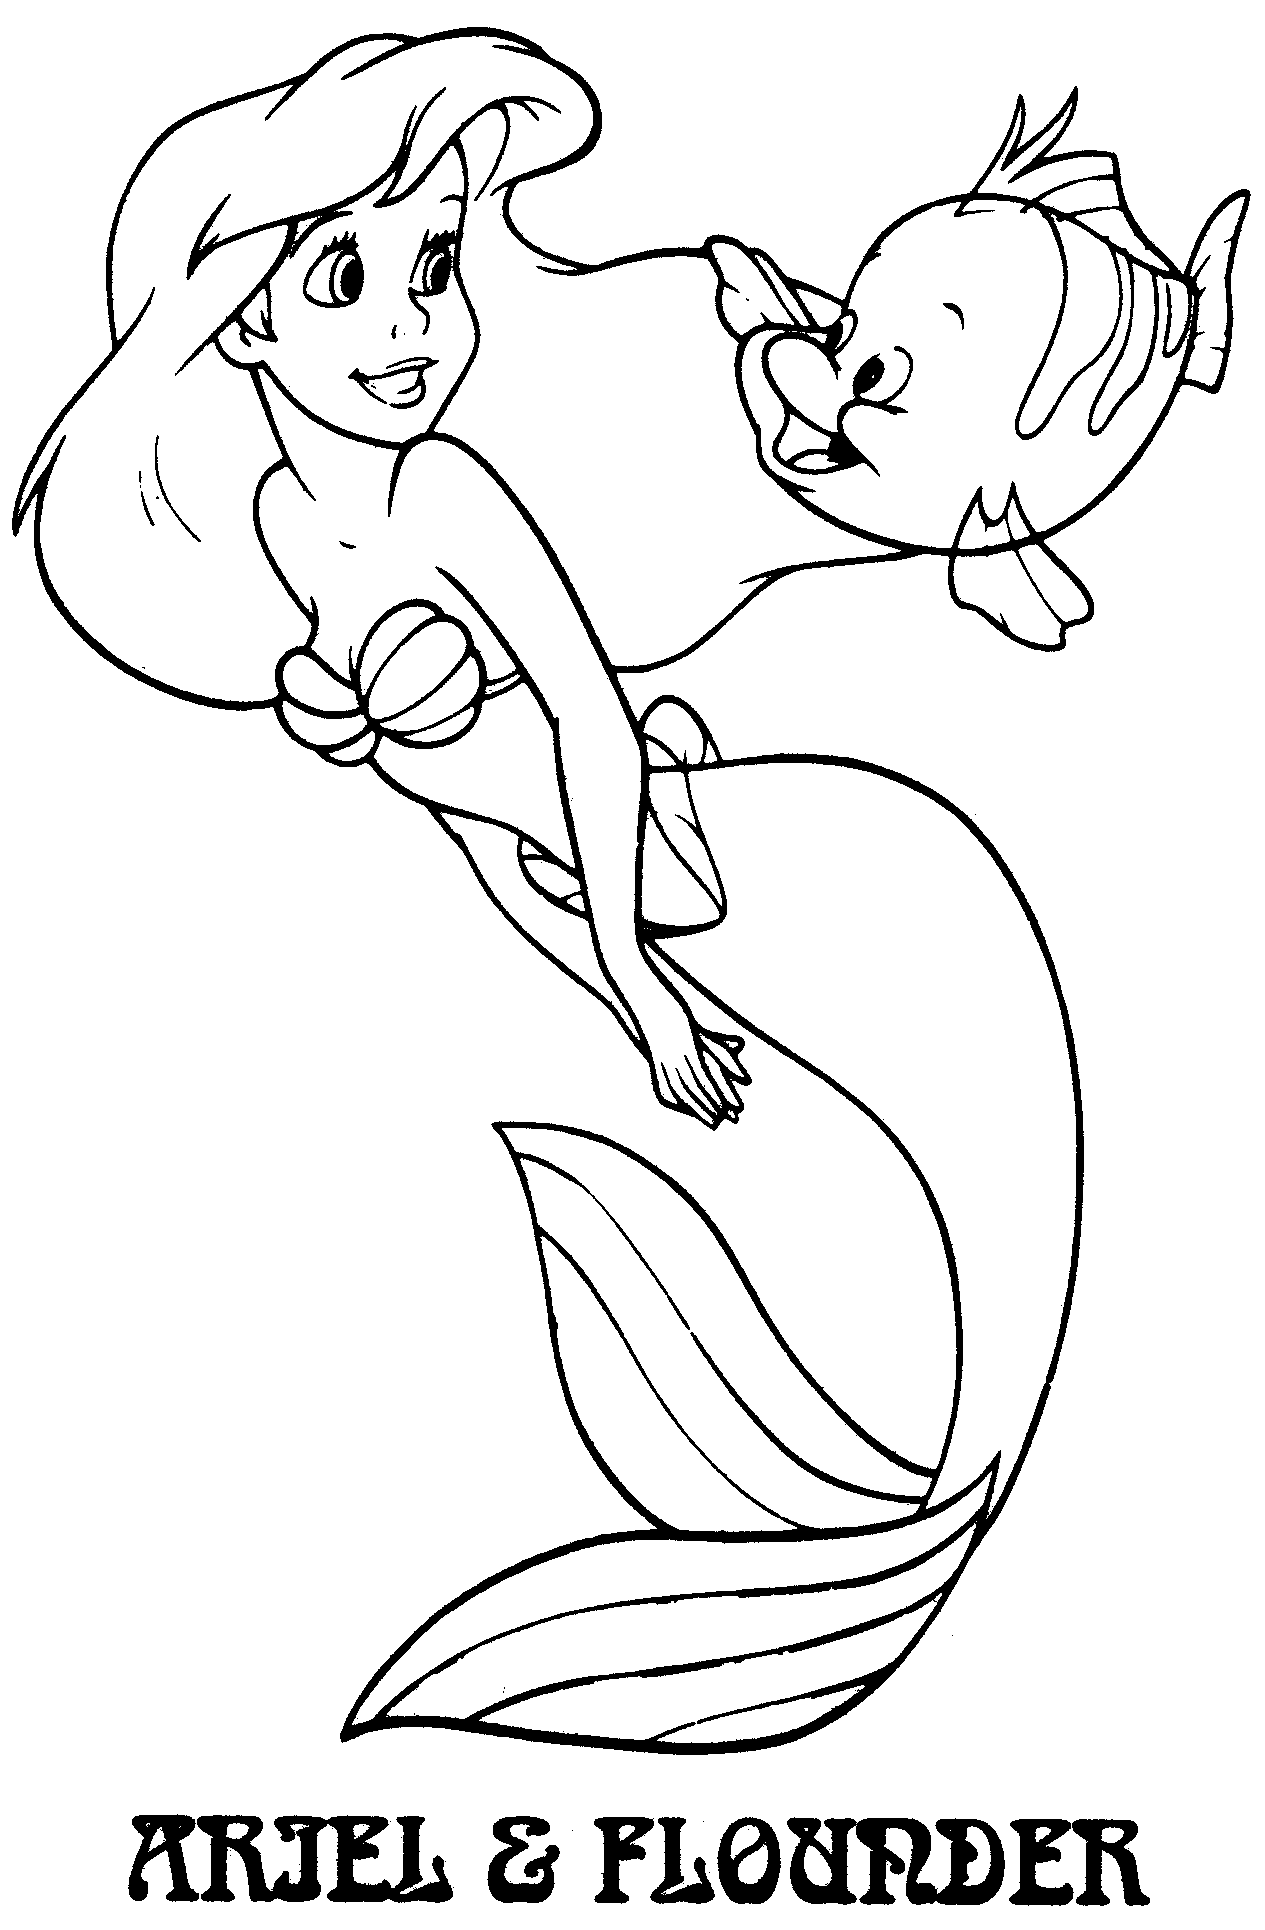 Flounder coloring pages to download and print for free